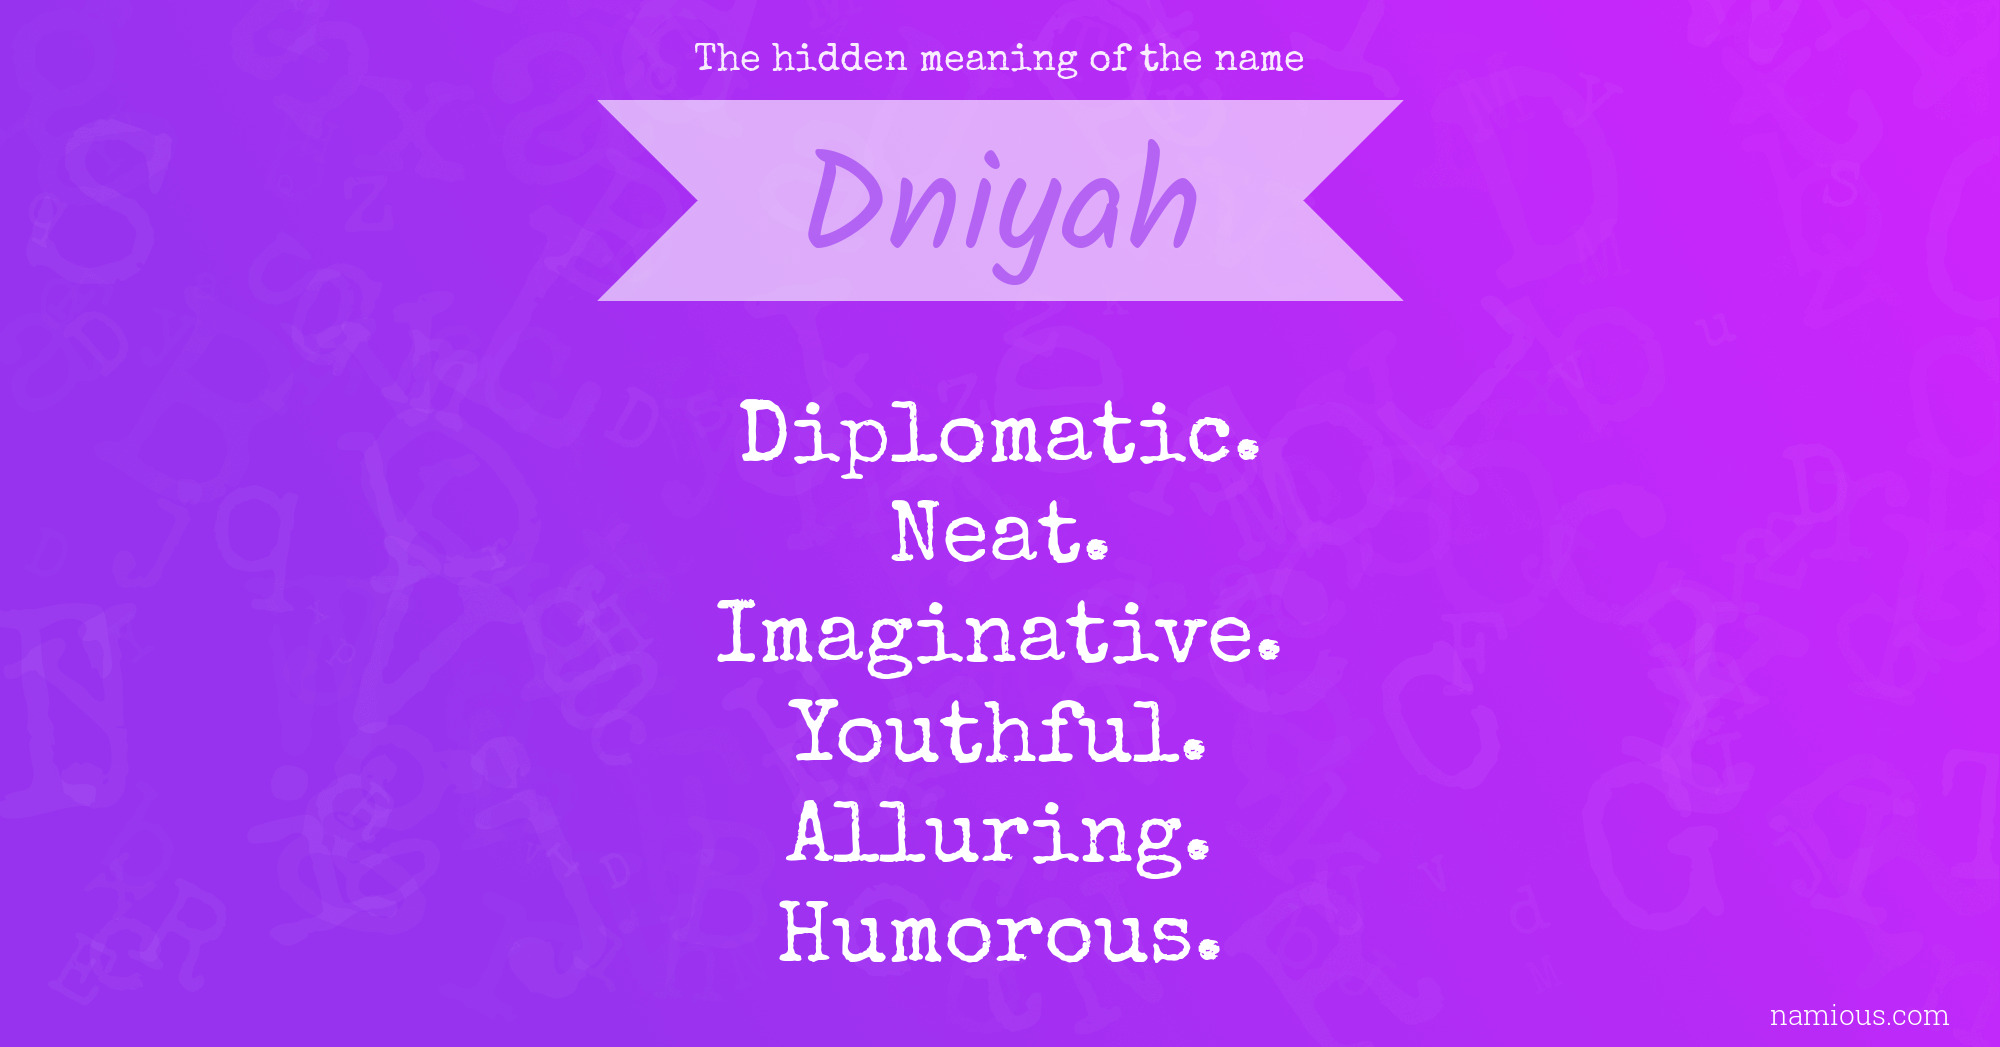 The hidden meaning of the name Dniyah